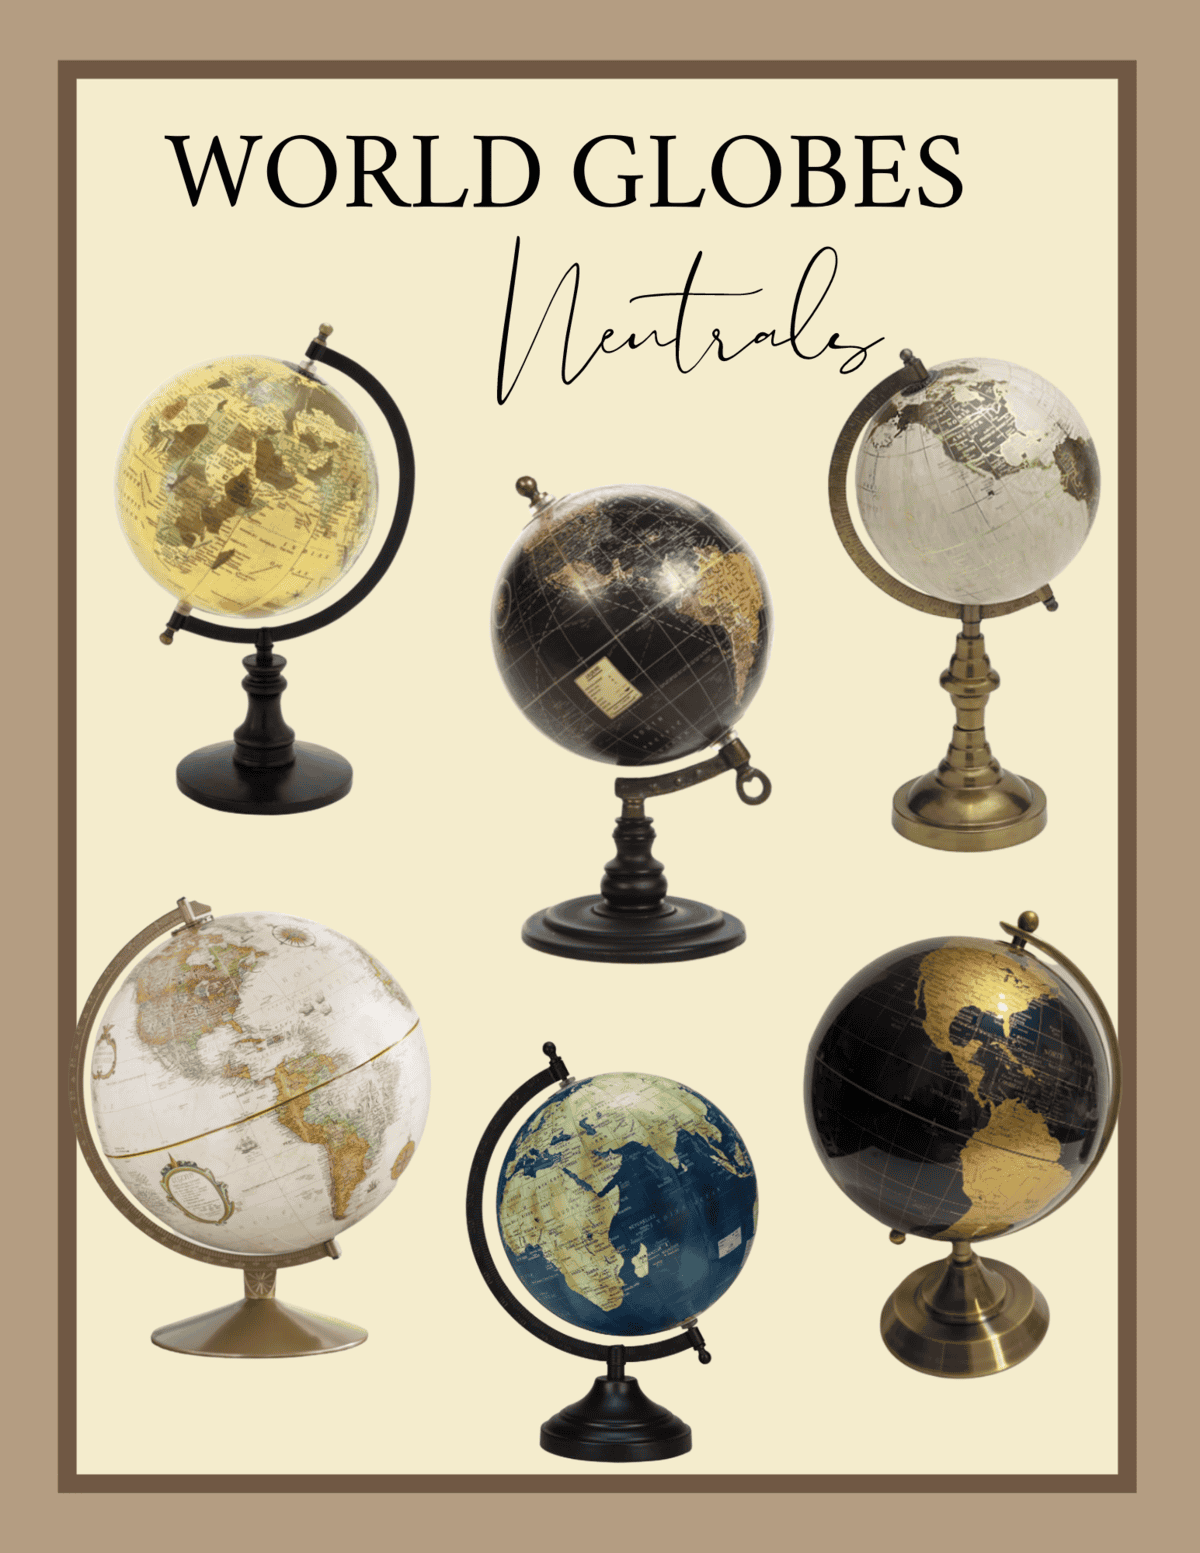 moodboard of world globes in neutral colors